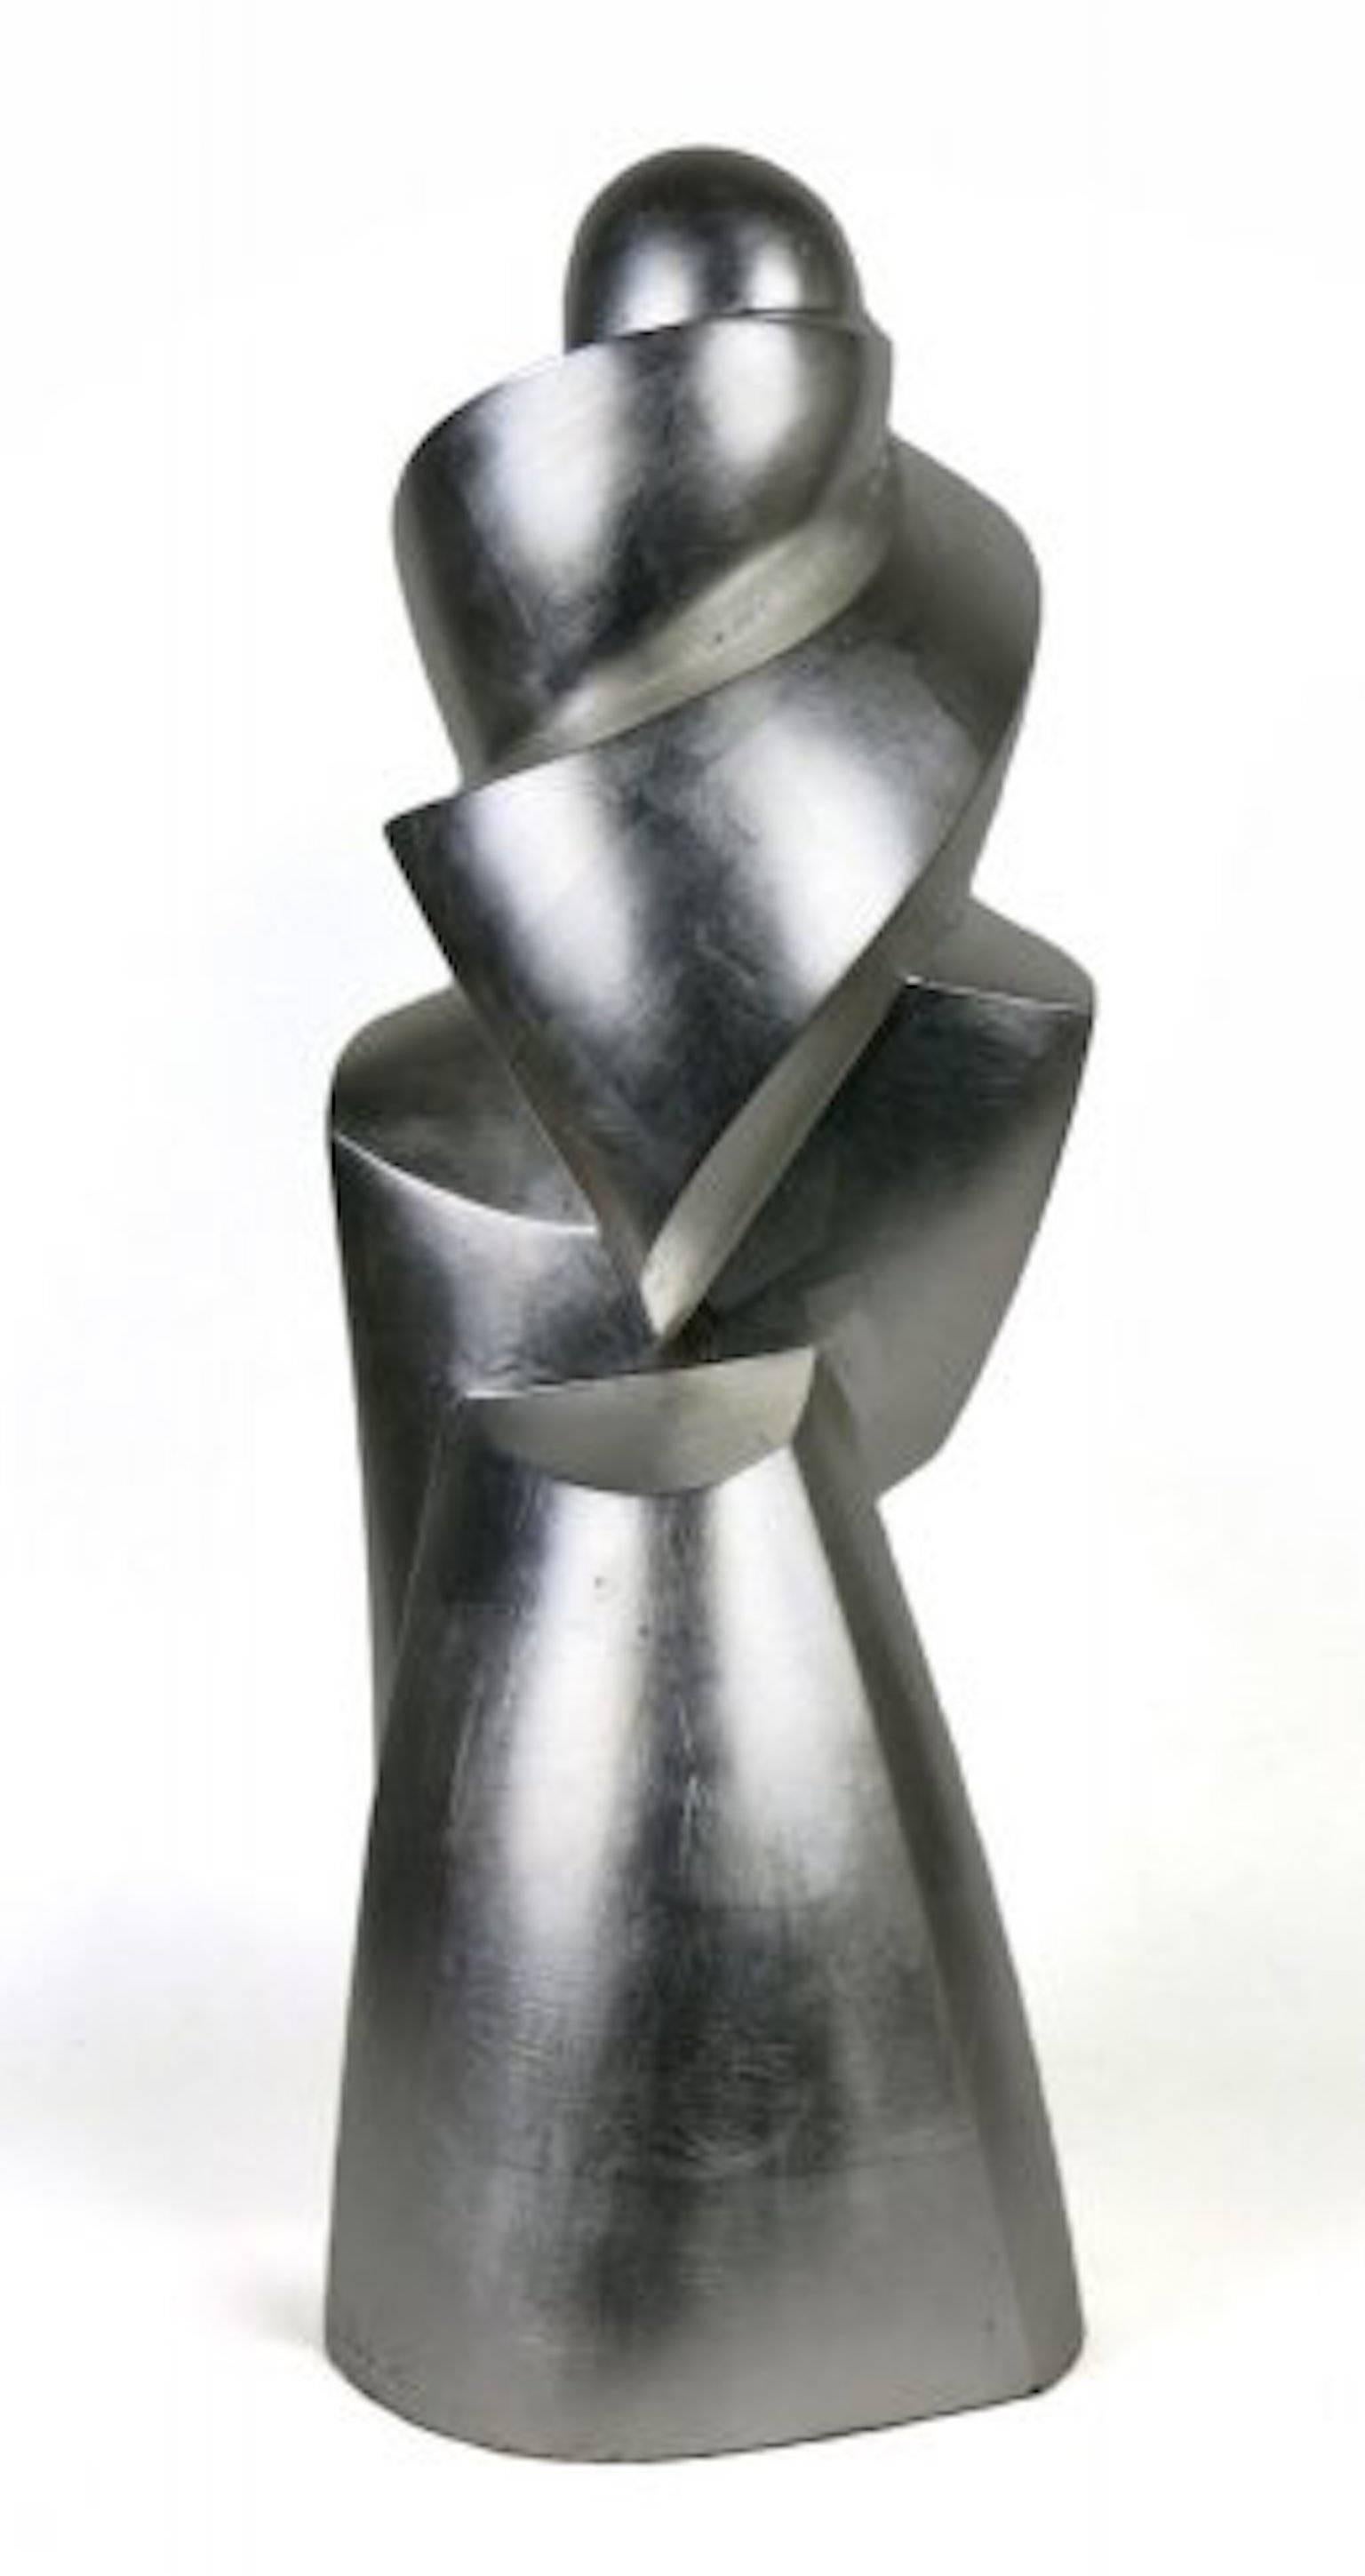 "As an artist I strive to create elegant sculptures that capture the true essence of the subject matter. Form, line and surface are used as the visual language. The figure is abstracted to a minimalist form, void of any superfluous information. The